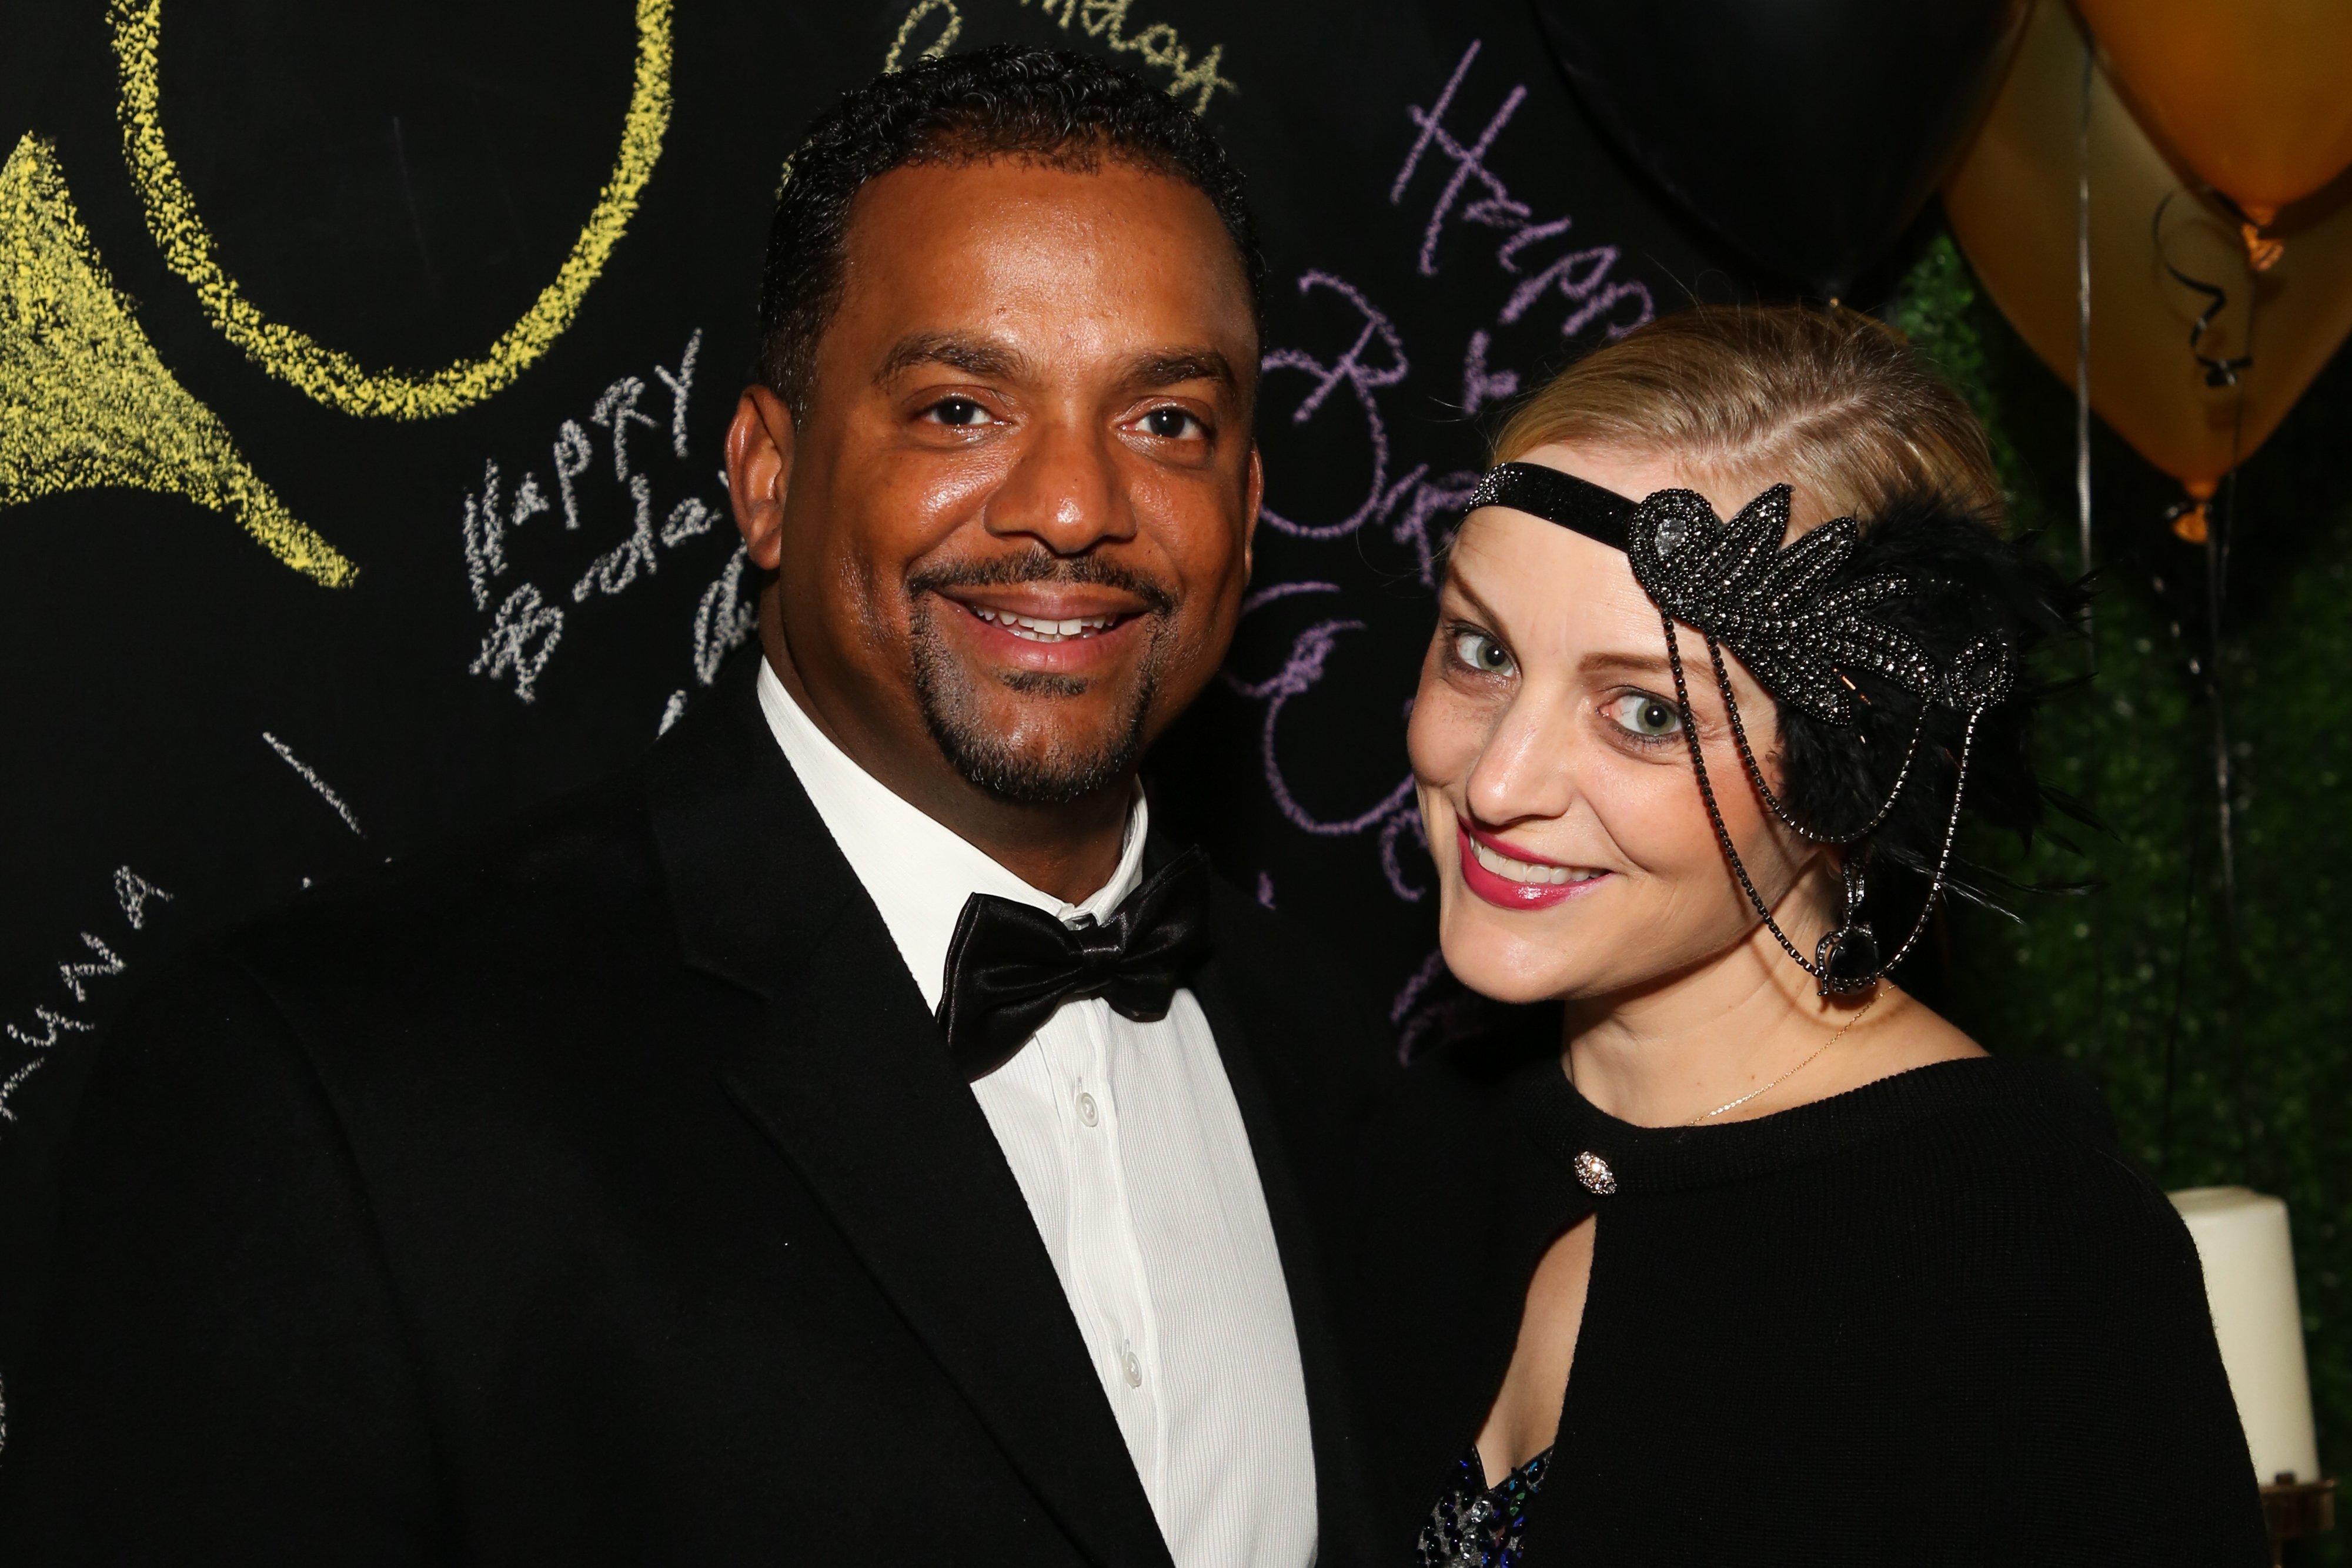 TV host Alfonso Ribeiro and his wife Angela Unkrich at Keo Motsepe's birthday party on November 30, 2019 | Photo: Getty Images